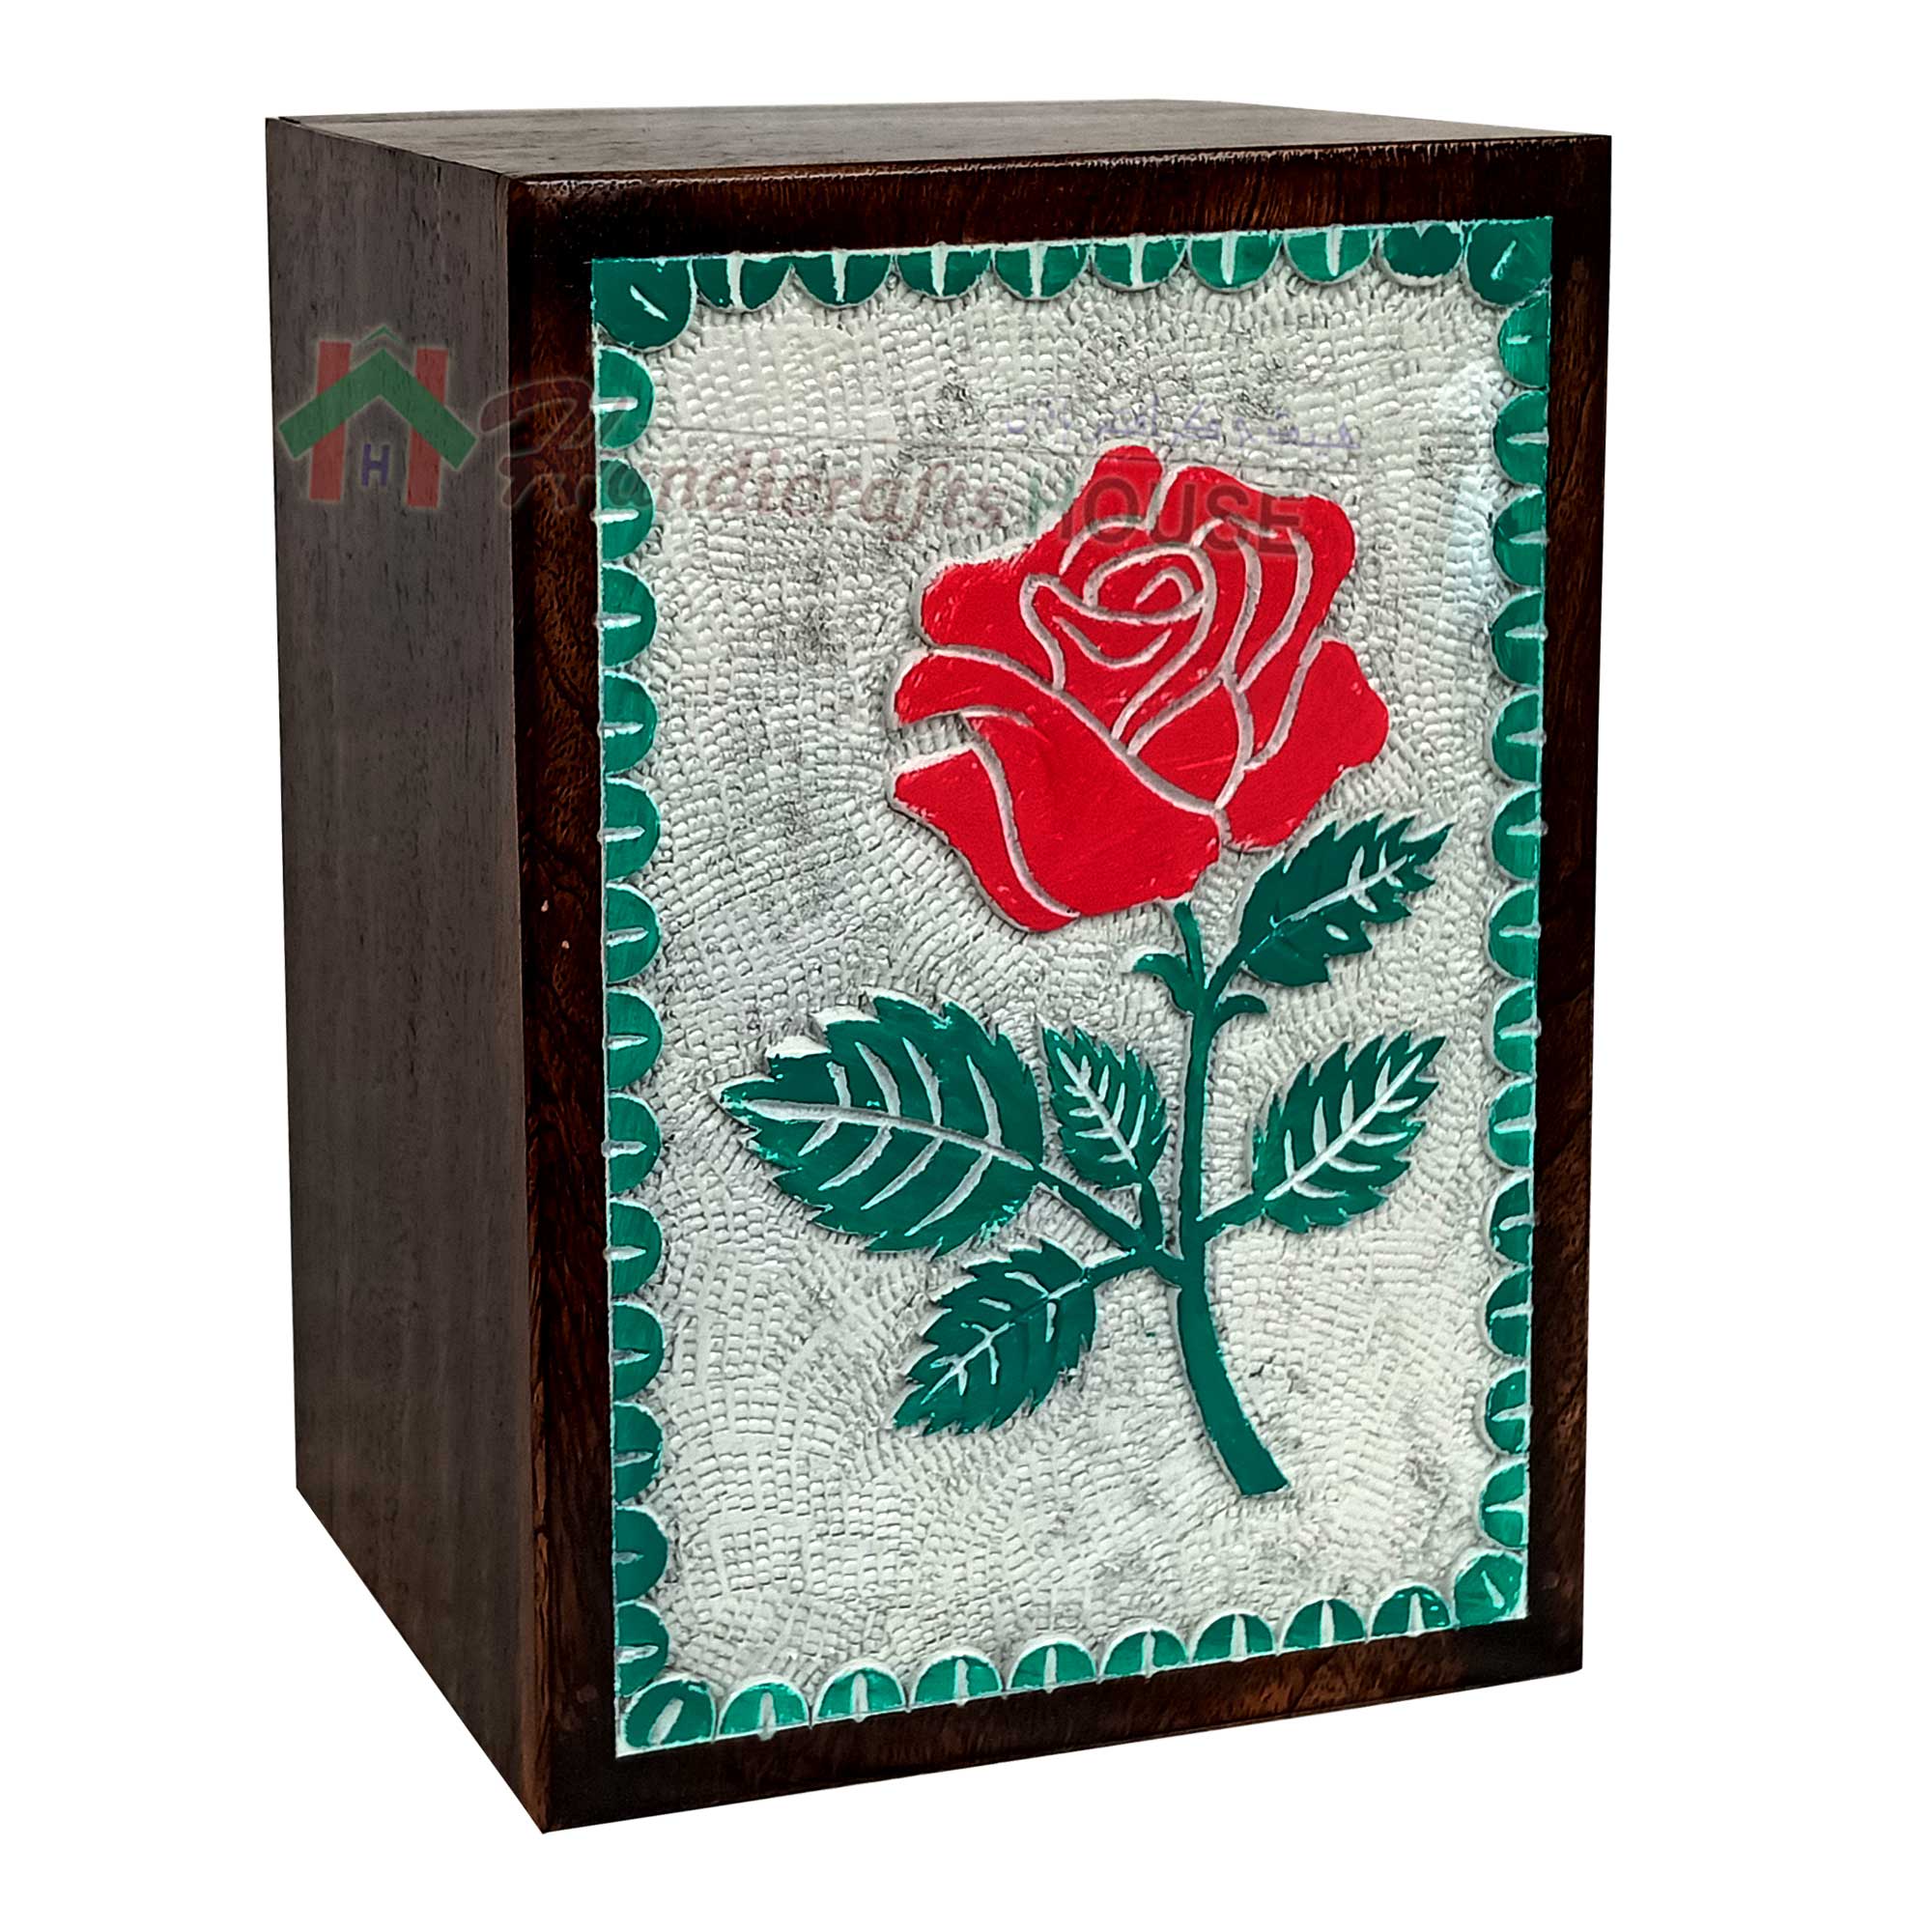 White and Green ROSE FLOWER Wooden Cremation Urns, Wood Funeral Urn for Human or Pet Ashes Adult - Hardwood Memorial Large Box